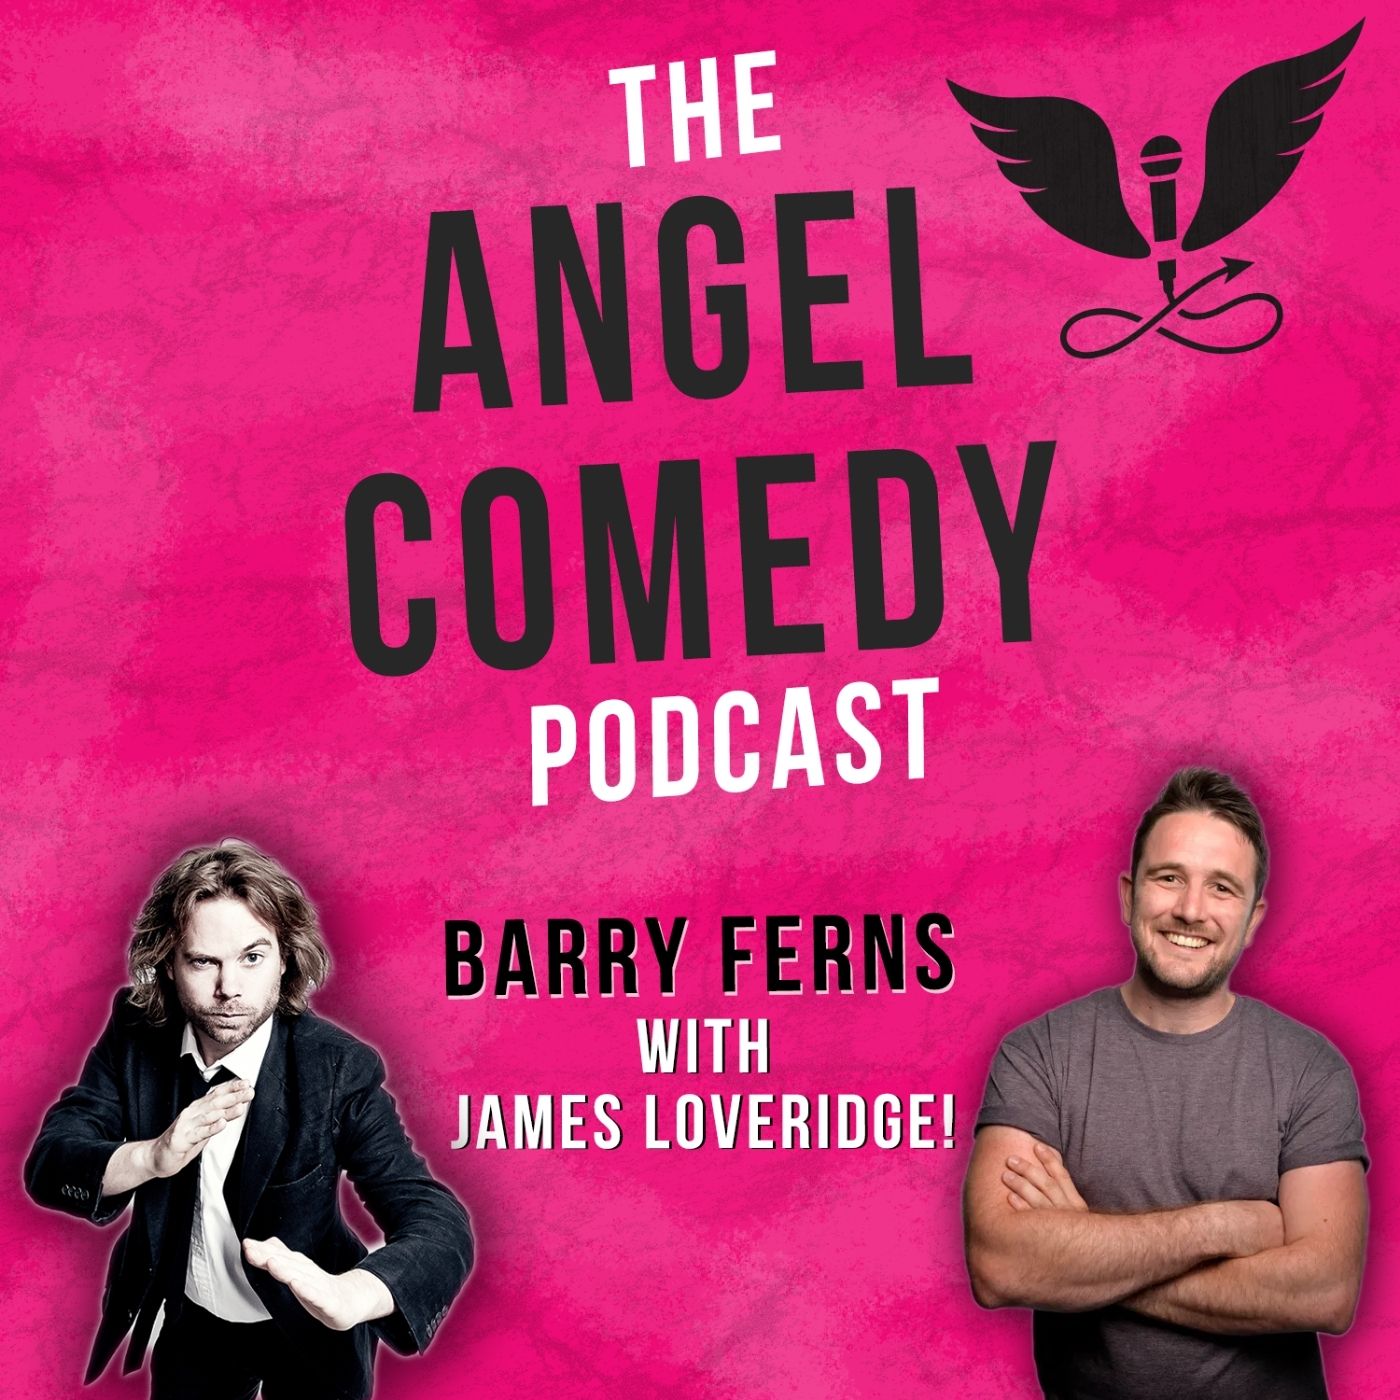 The Angel Comedy Podcast with James Loveridge